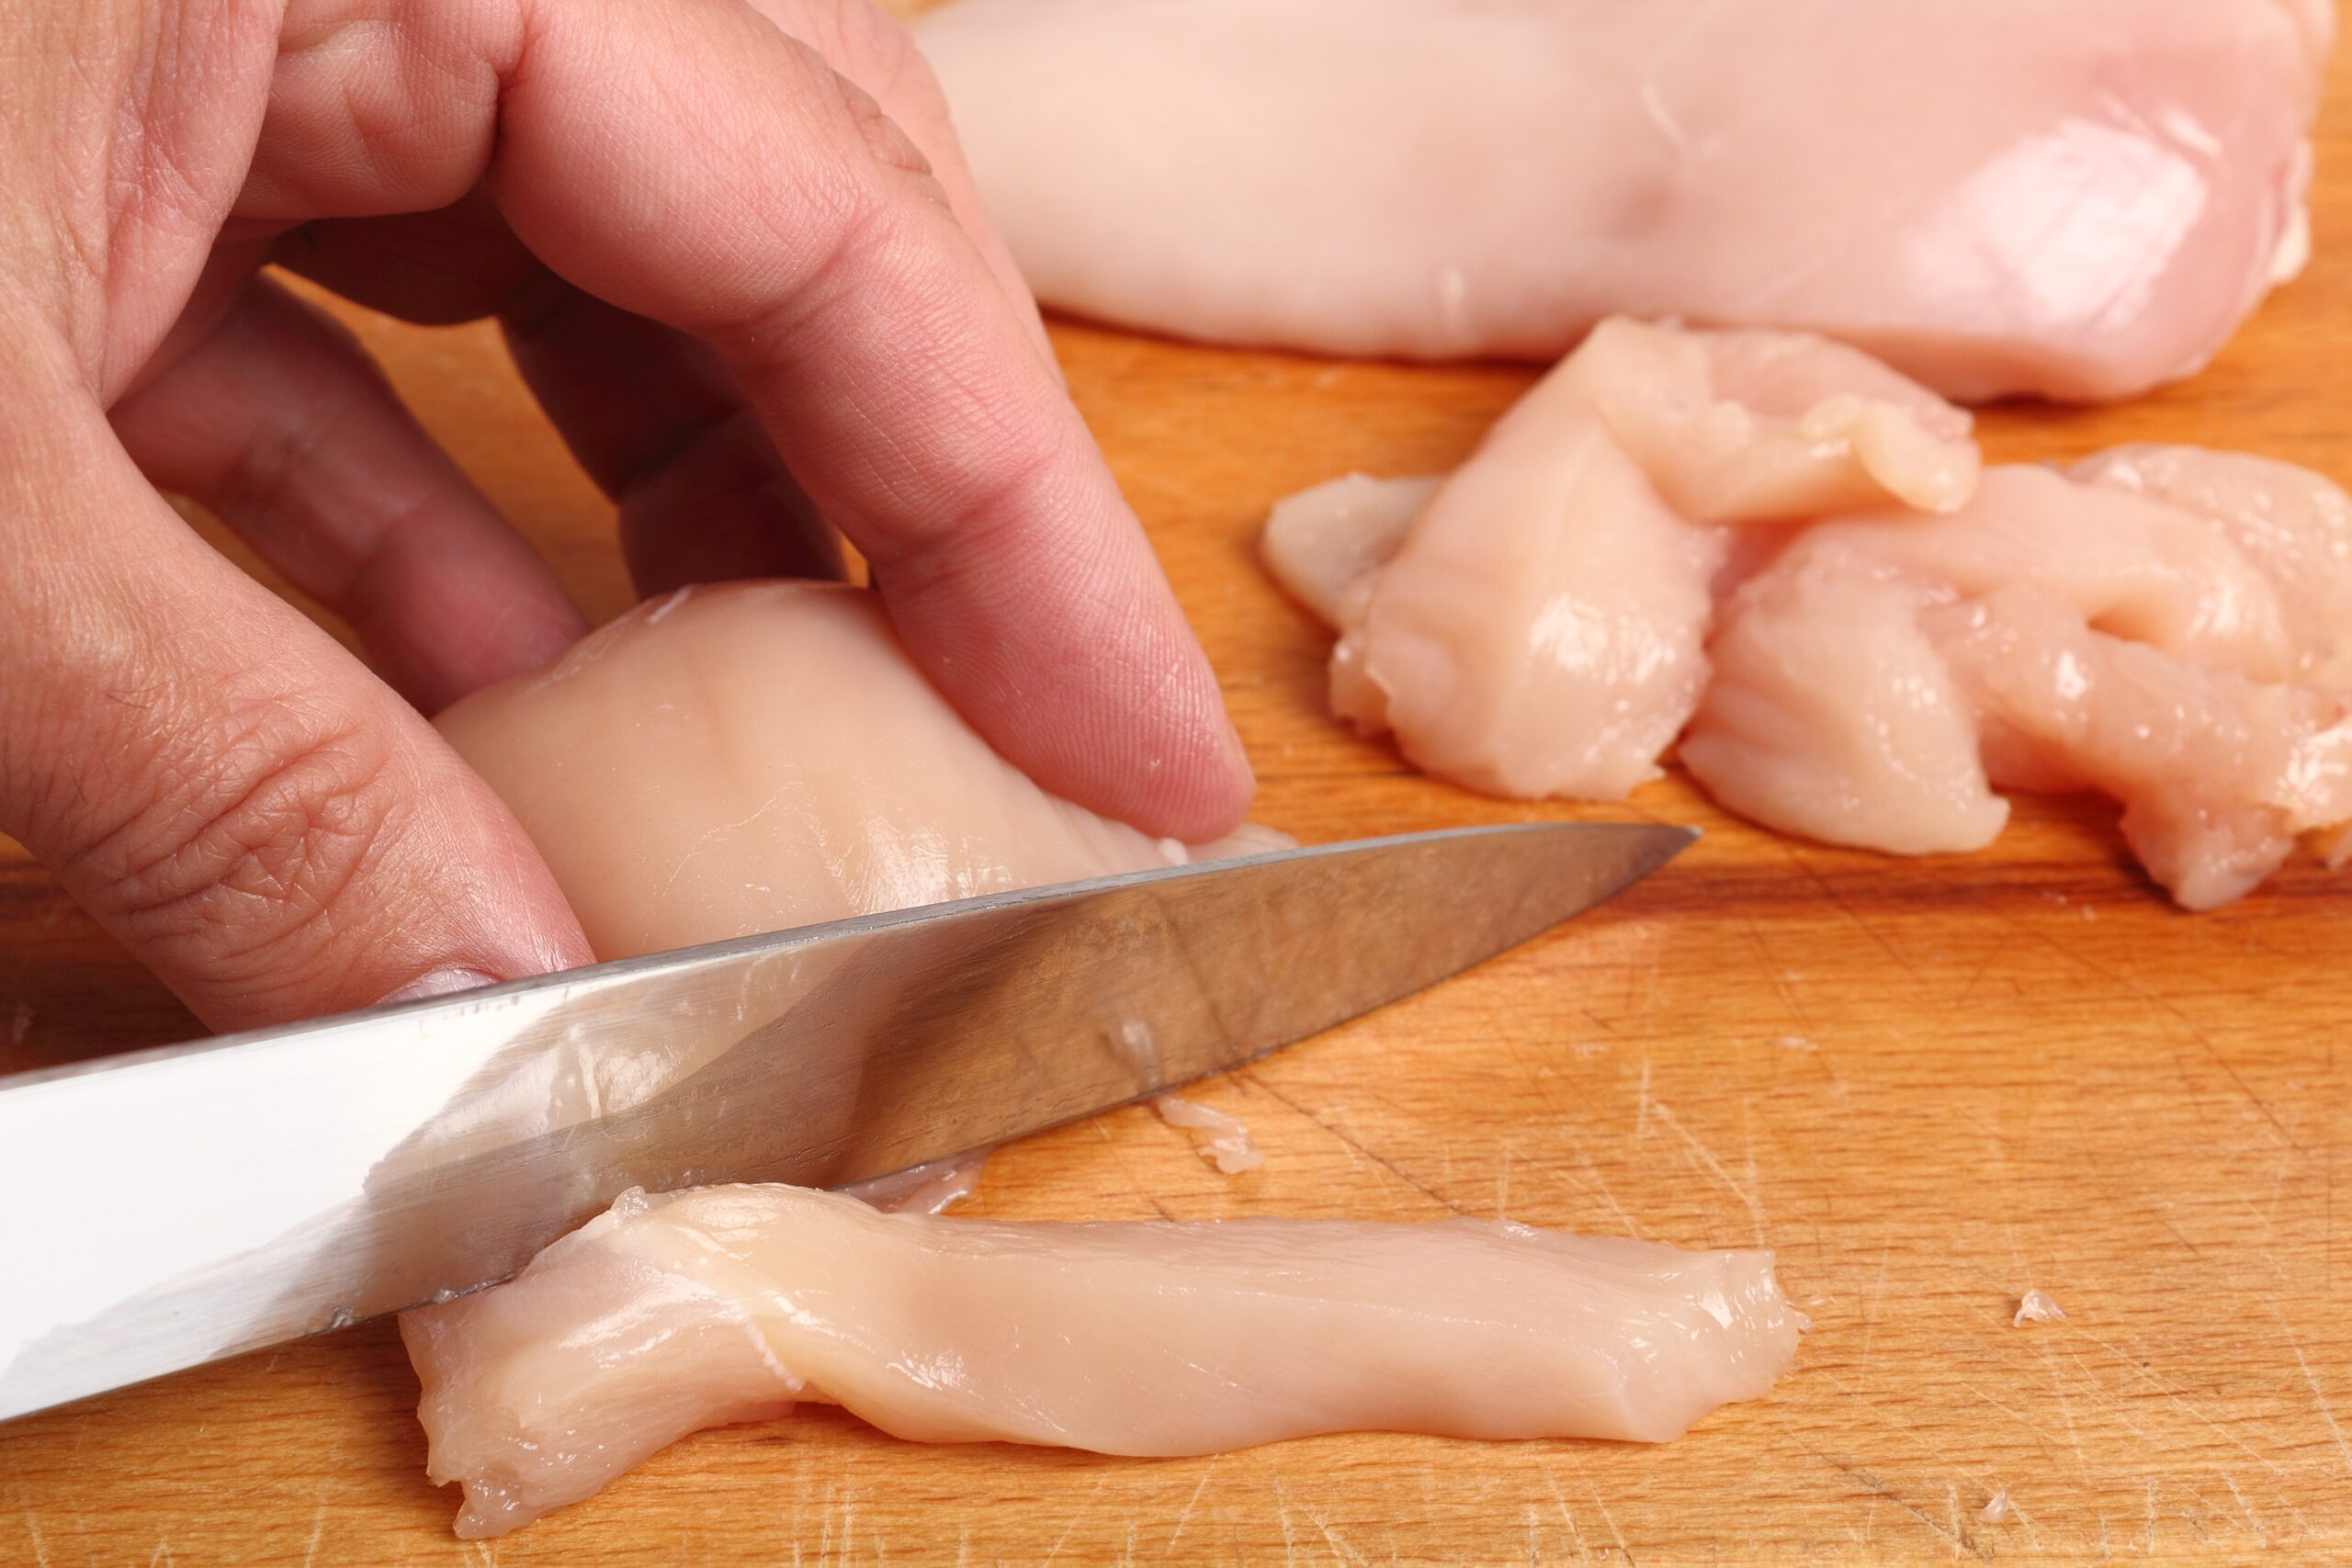 Master the Art of Cutting Chicken Against the Grain for Perfect Slices